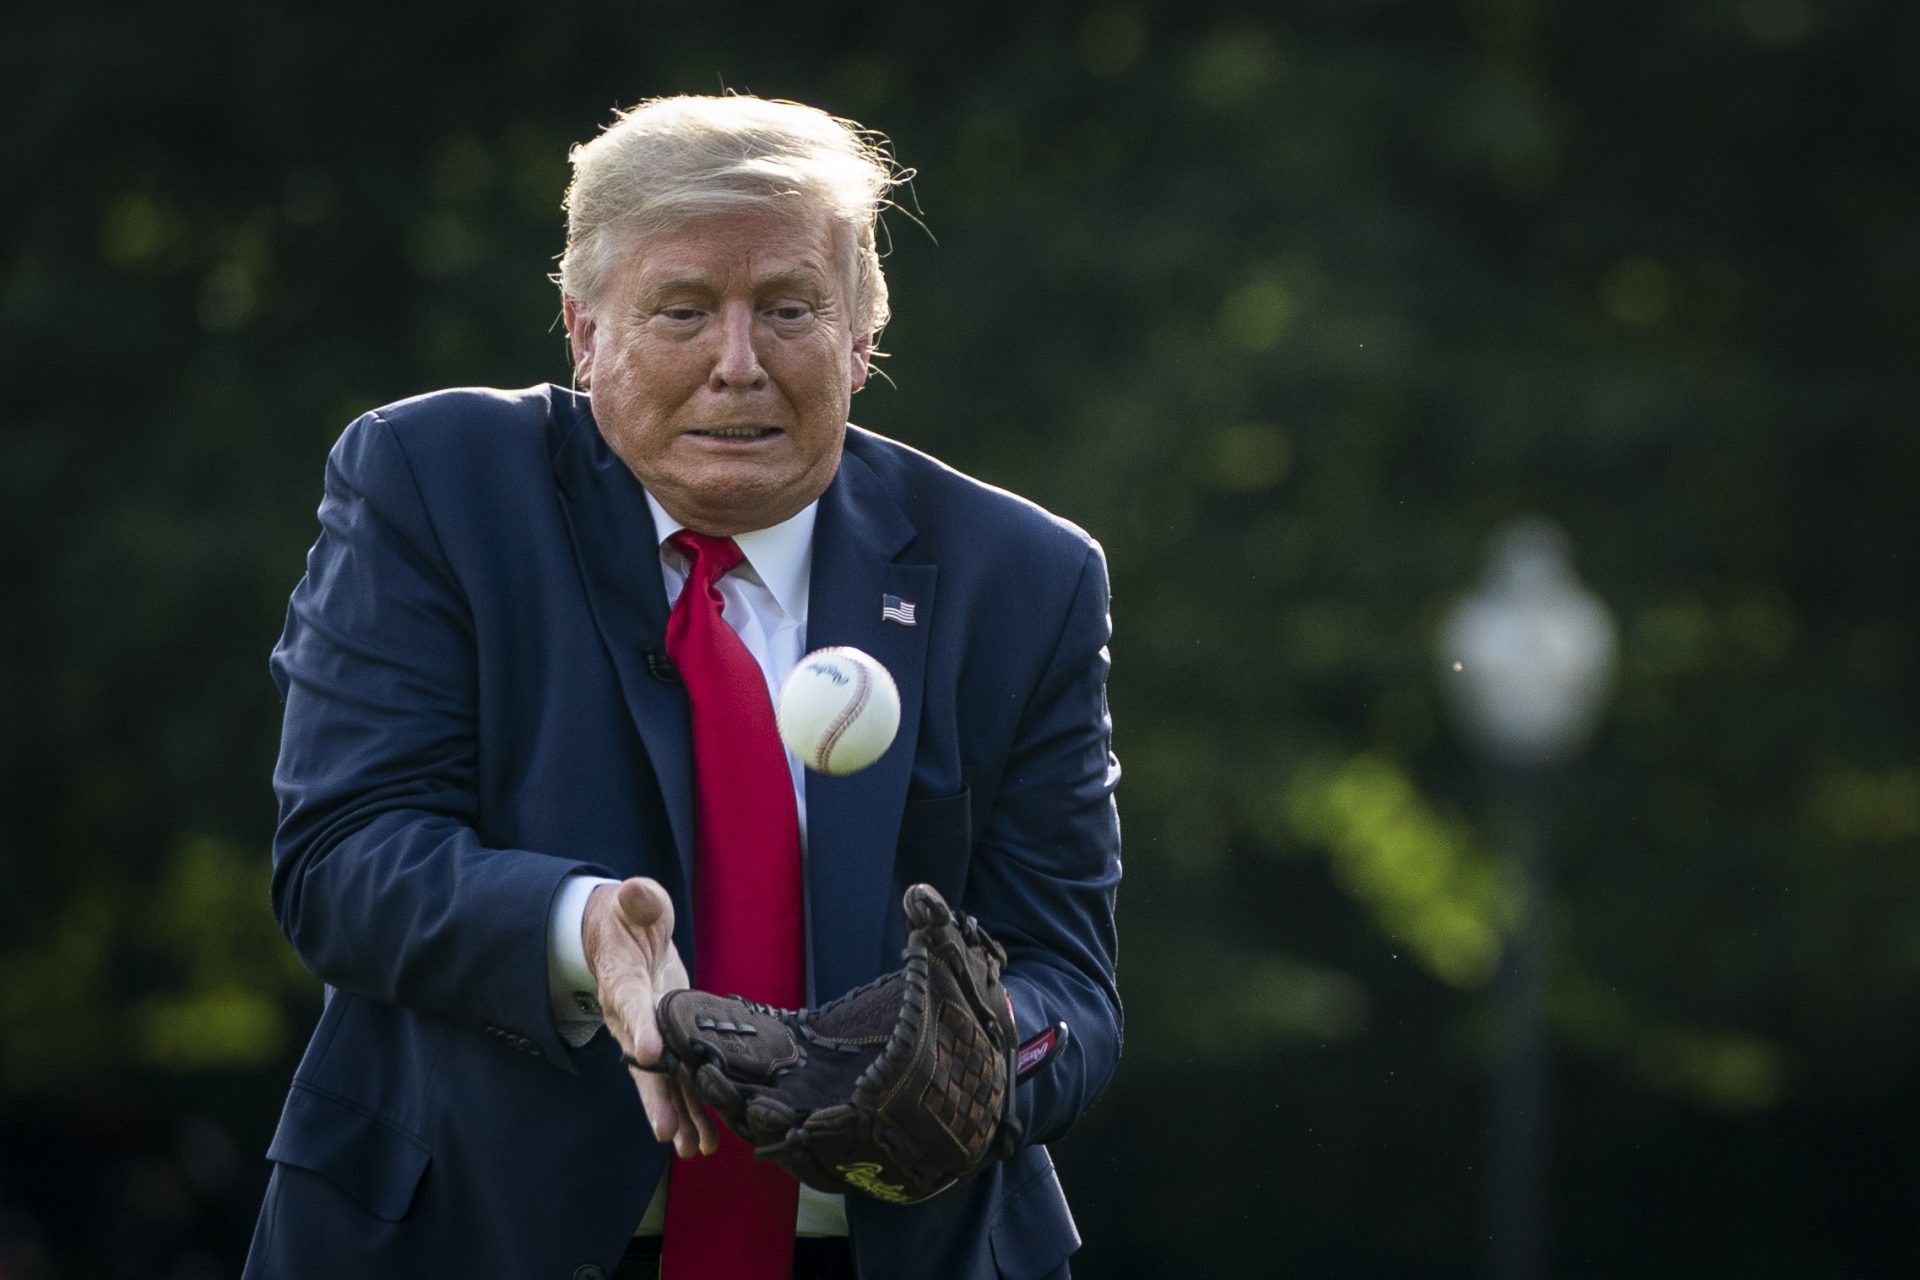 Trump’s terror playing catch with Mariano Rivera 